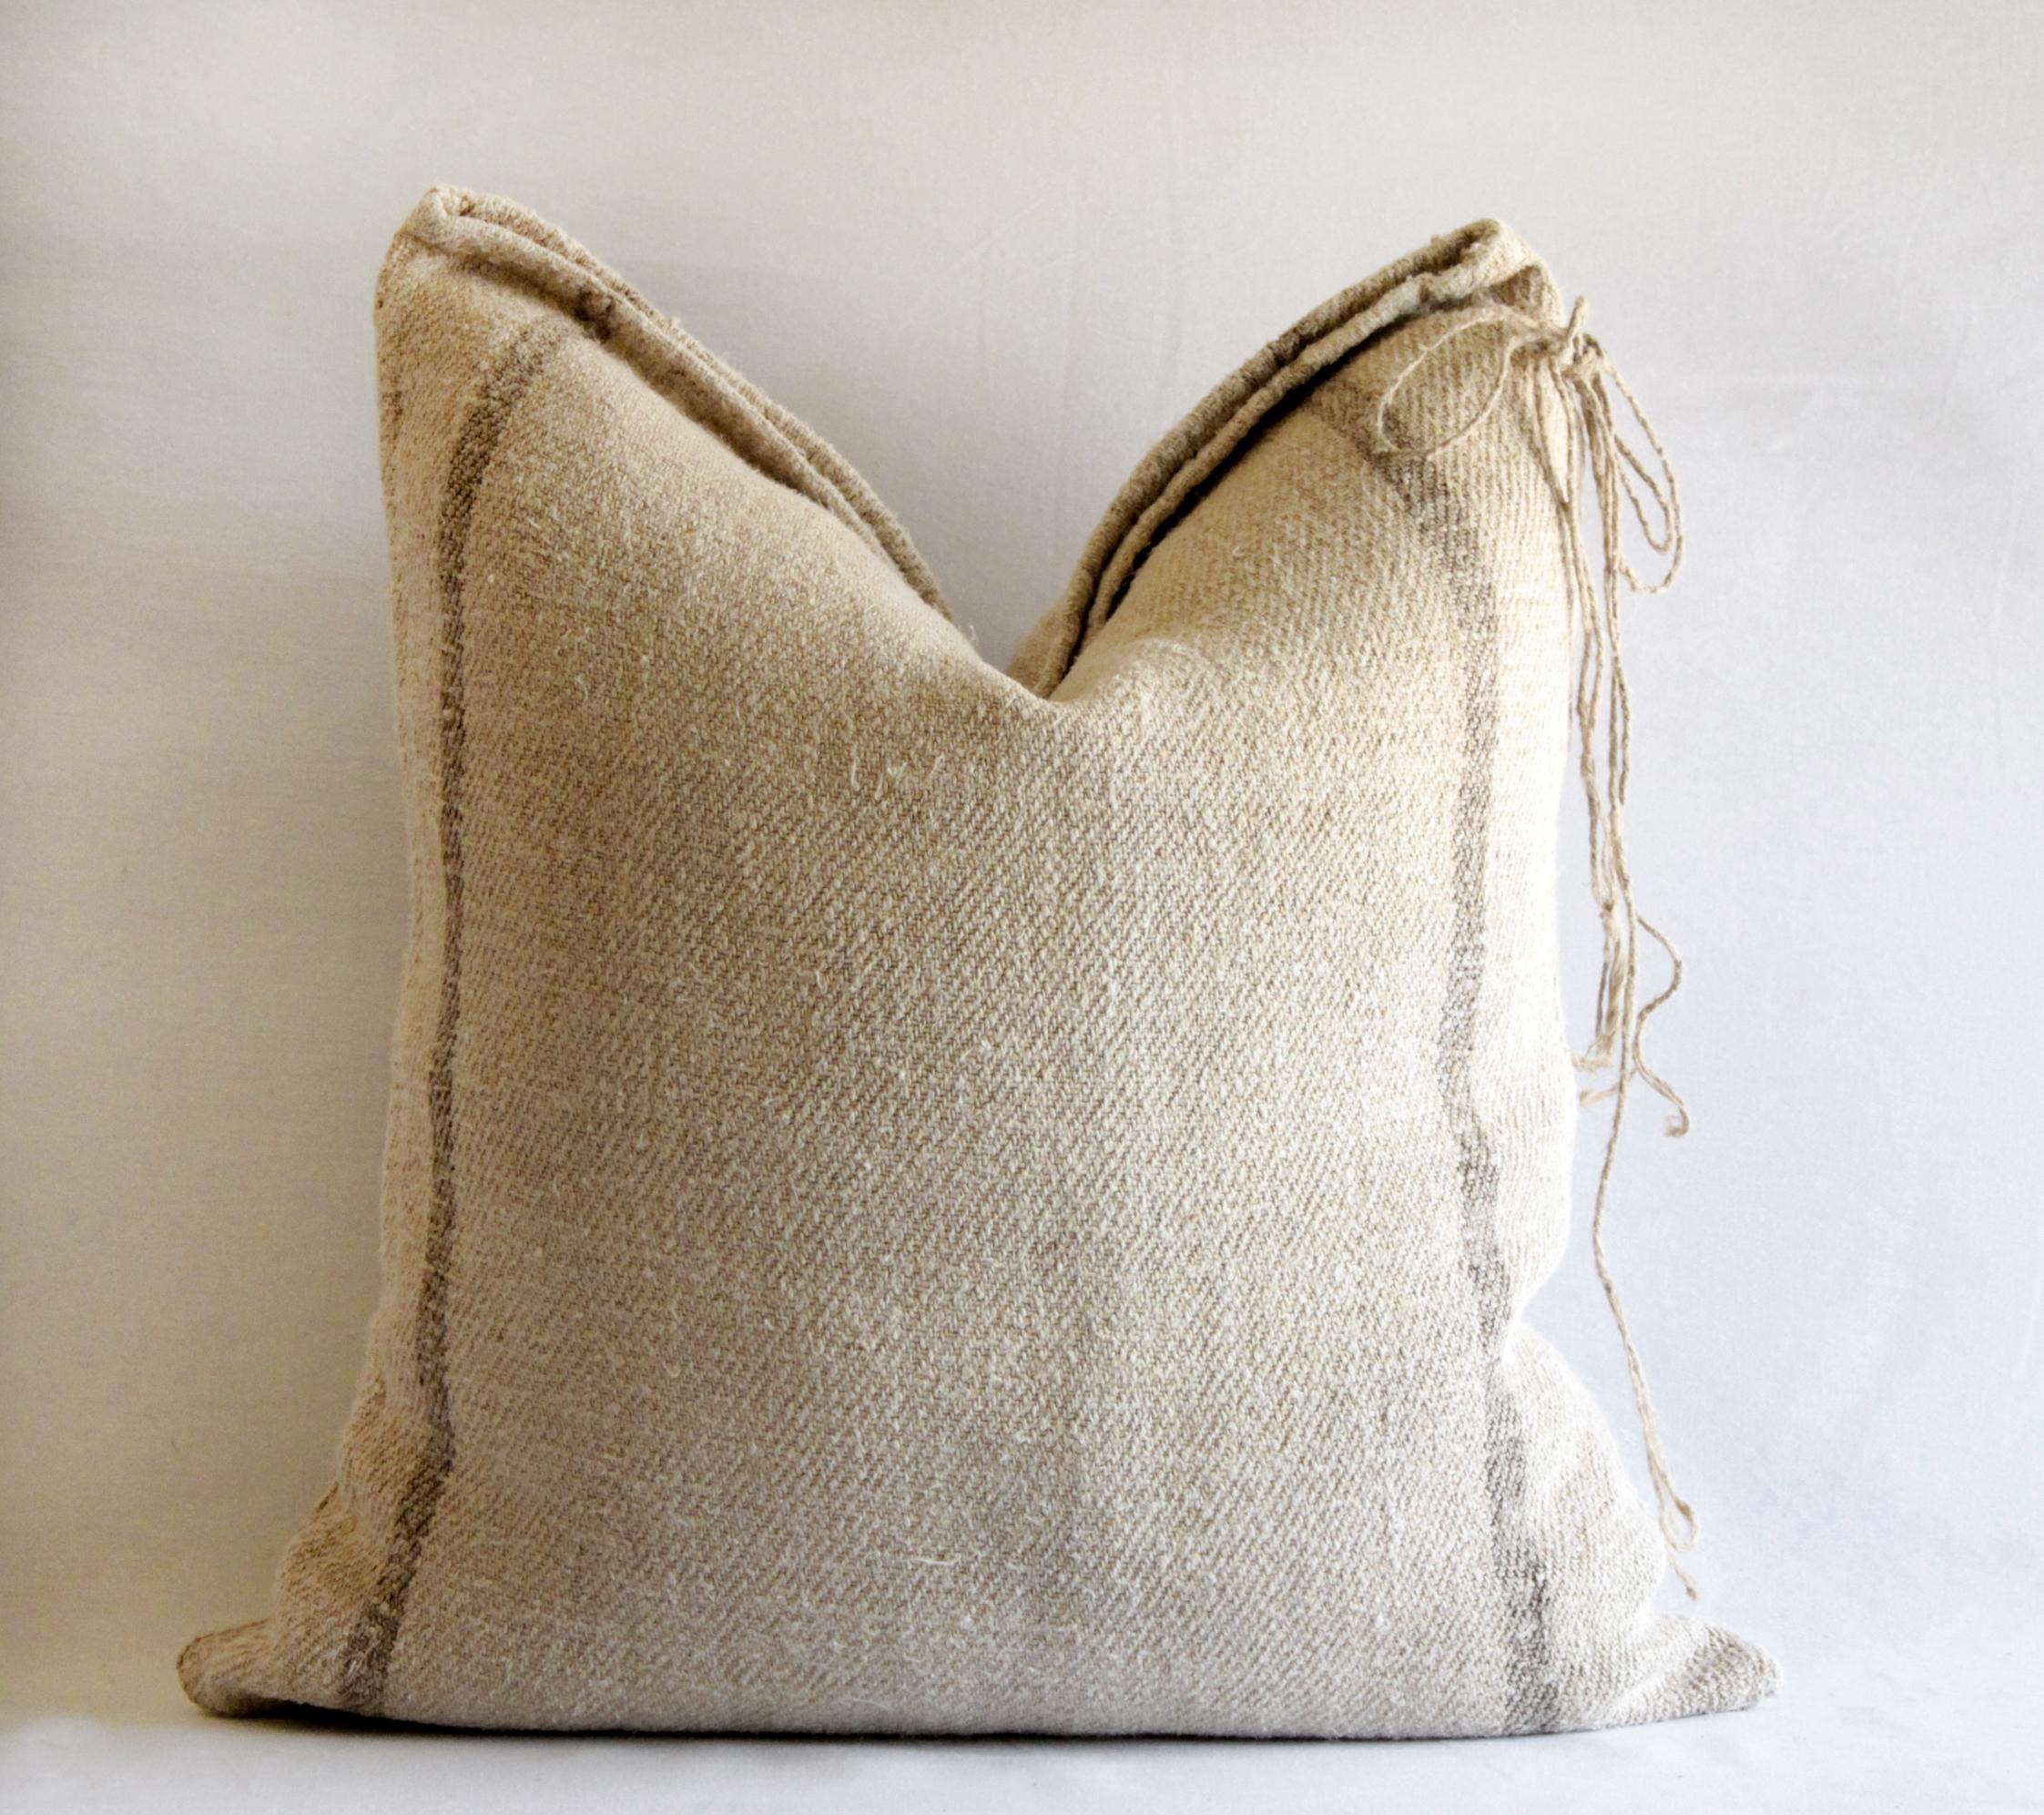 Antique German grain sack pillow with brown stripes
This pillow was made from an original circa 1900s grain sack, thick nubby soft linen and hemp grain sack that has been pre washed, with natural color background and medium brown stripes.
Hidden